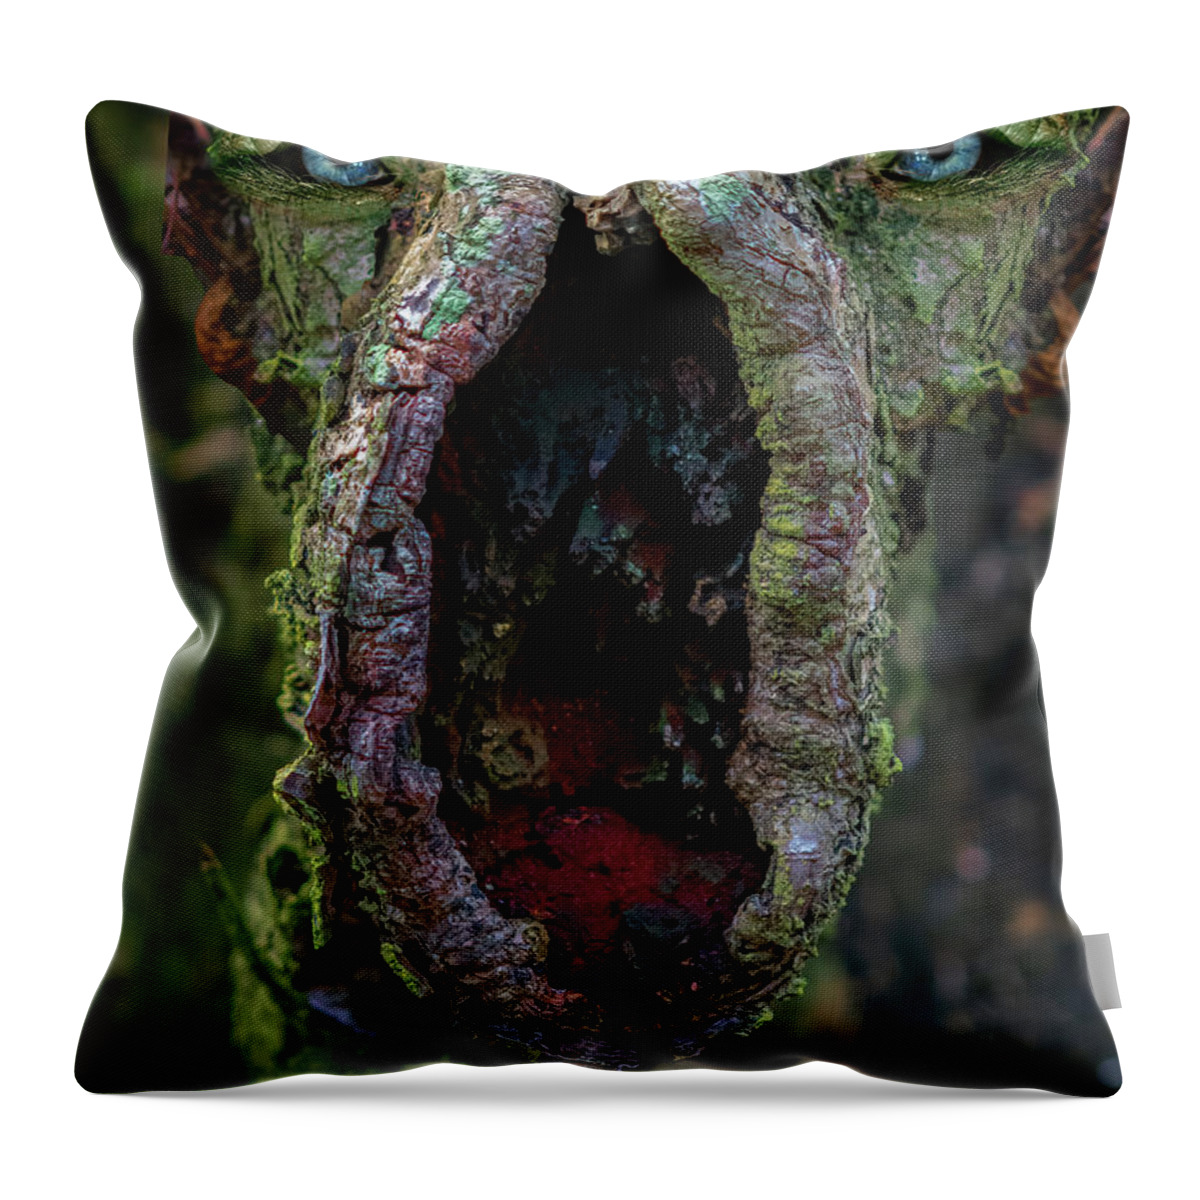 Wood Throw Pillow featuring the digital art Woody 304 by Rick Mosher